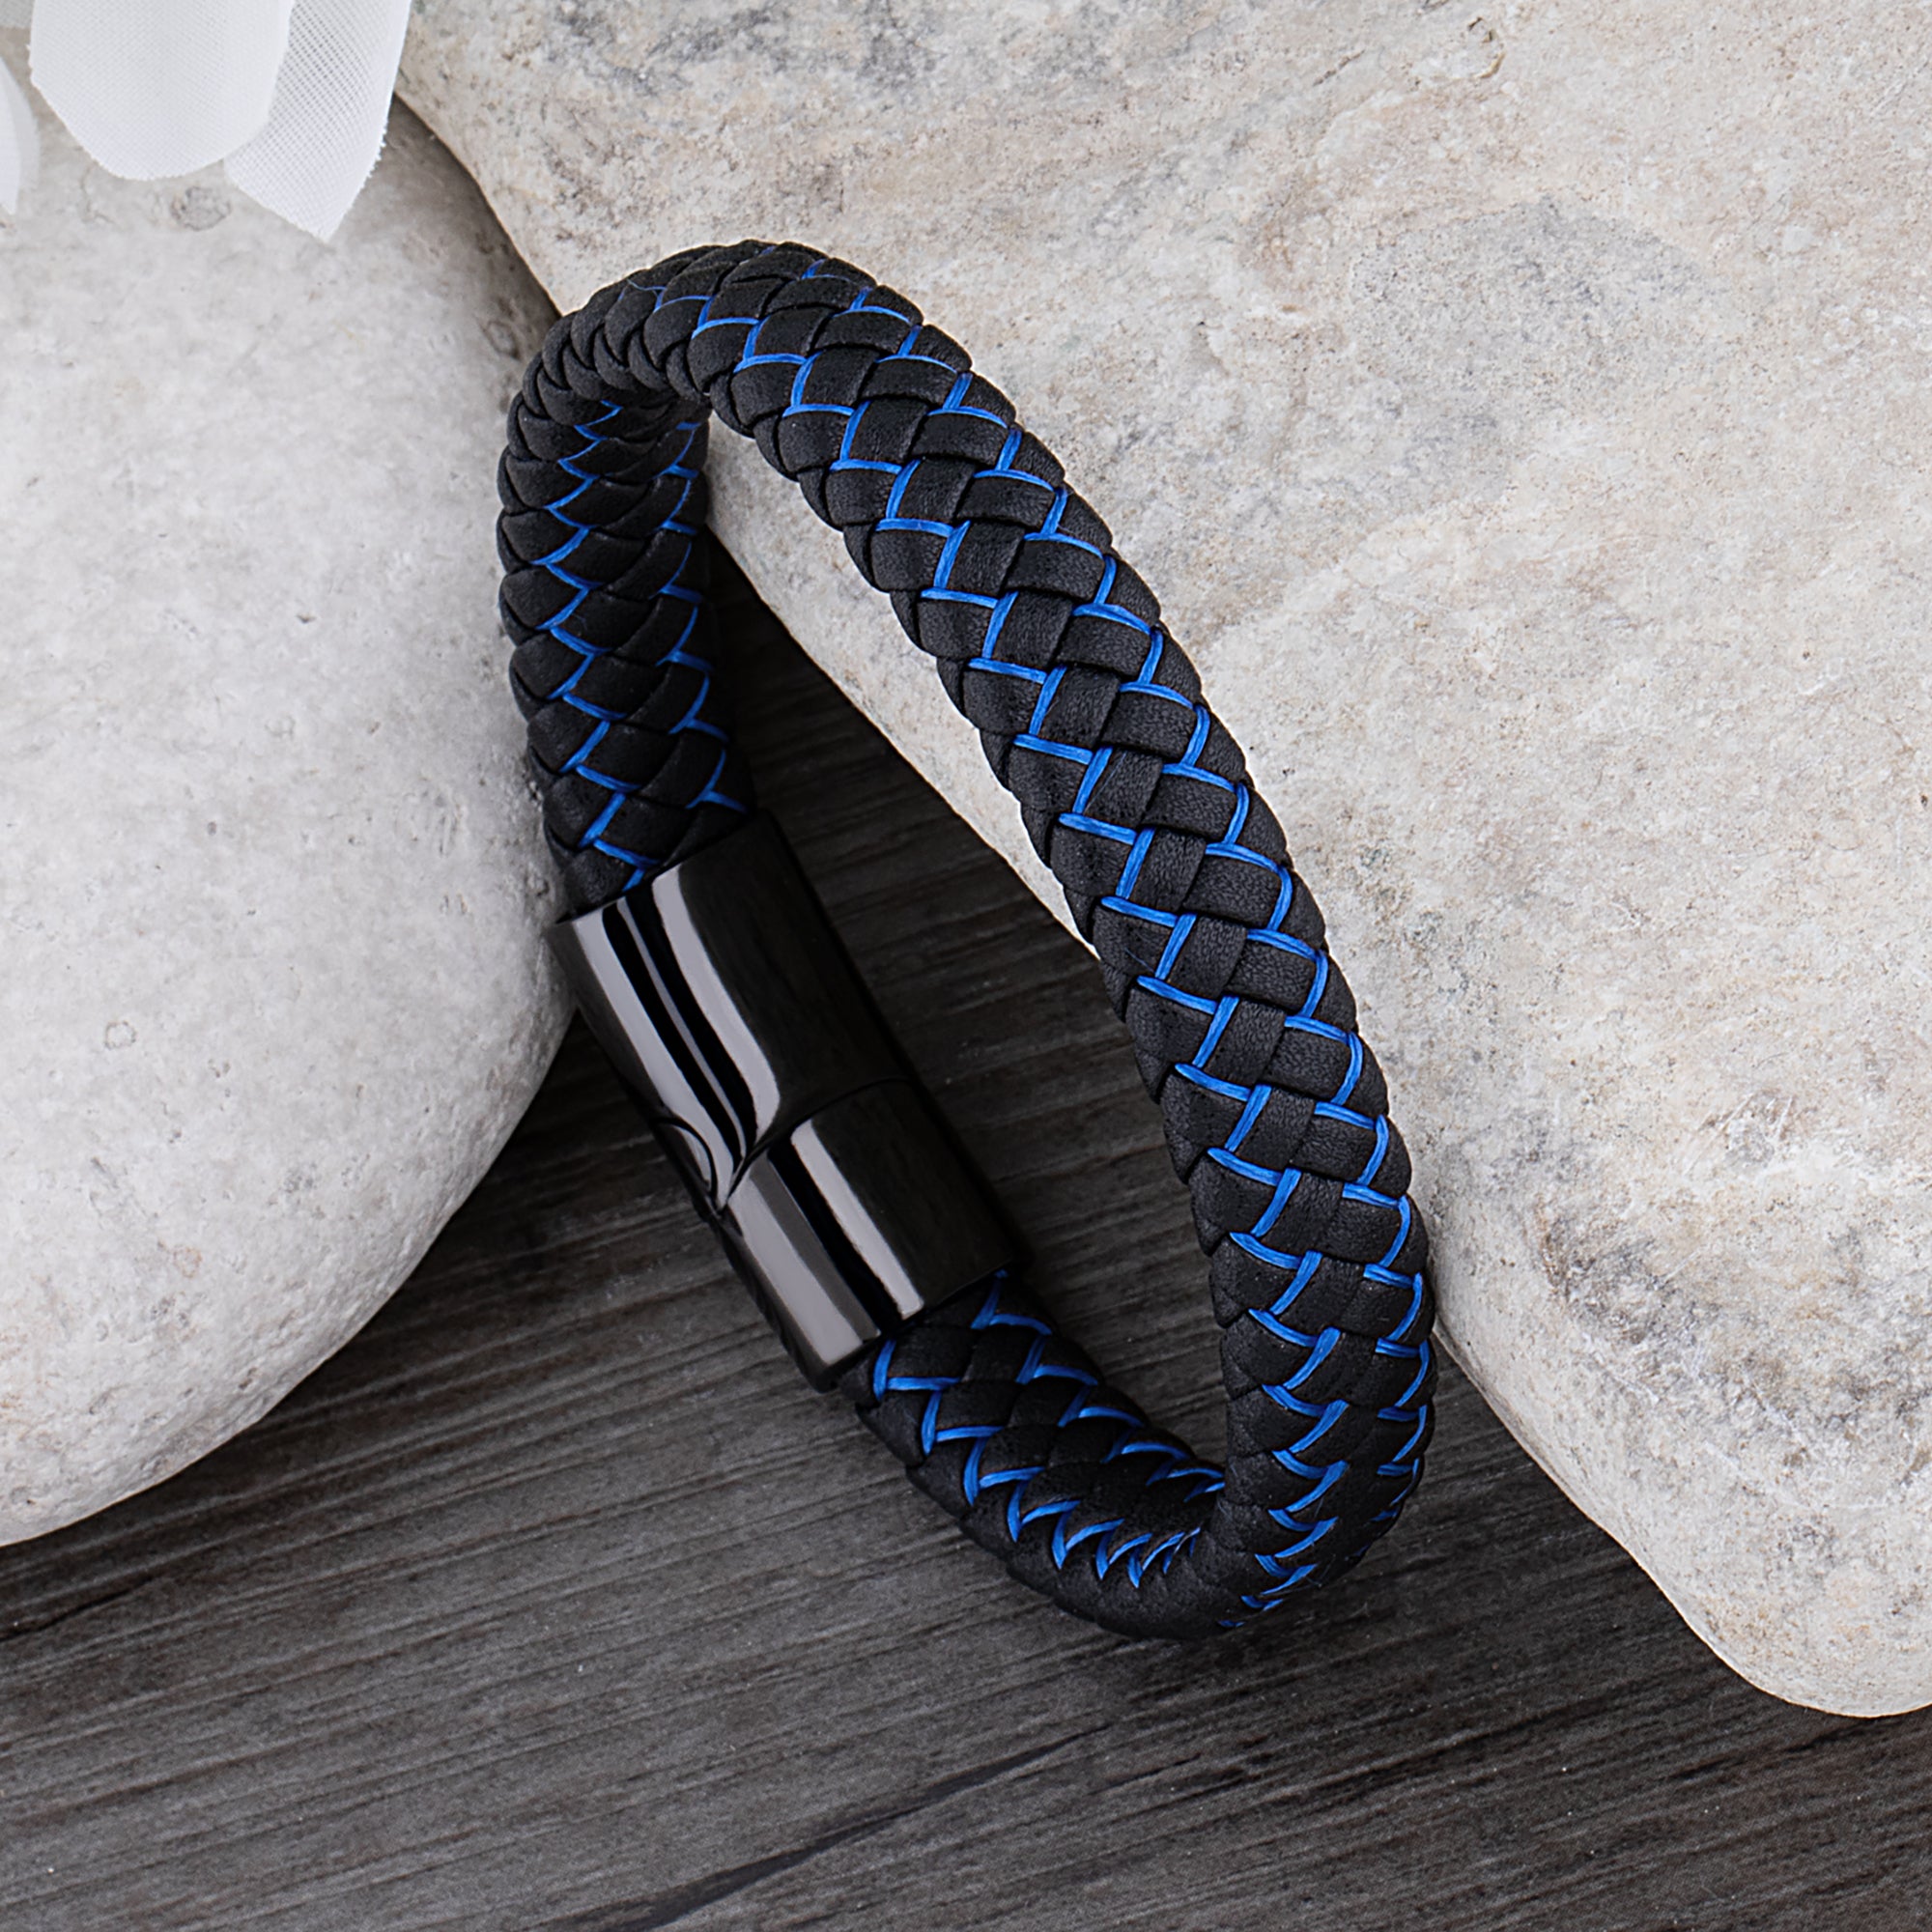 Men's Stainless Steel Bracelet with Black and Blue Braided Leather - SSLB022